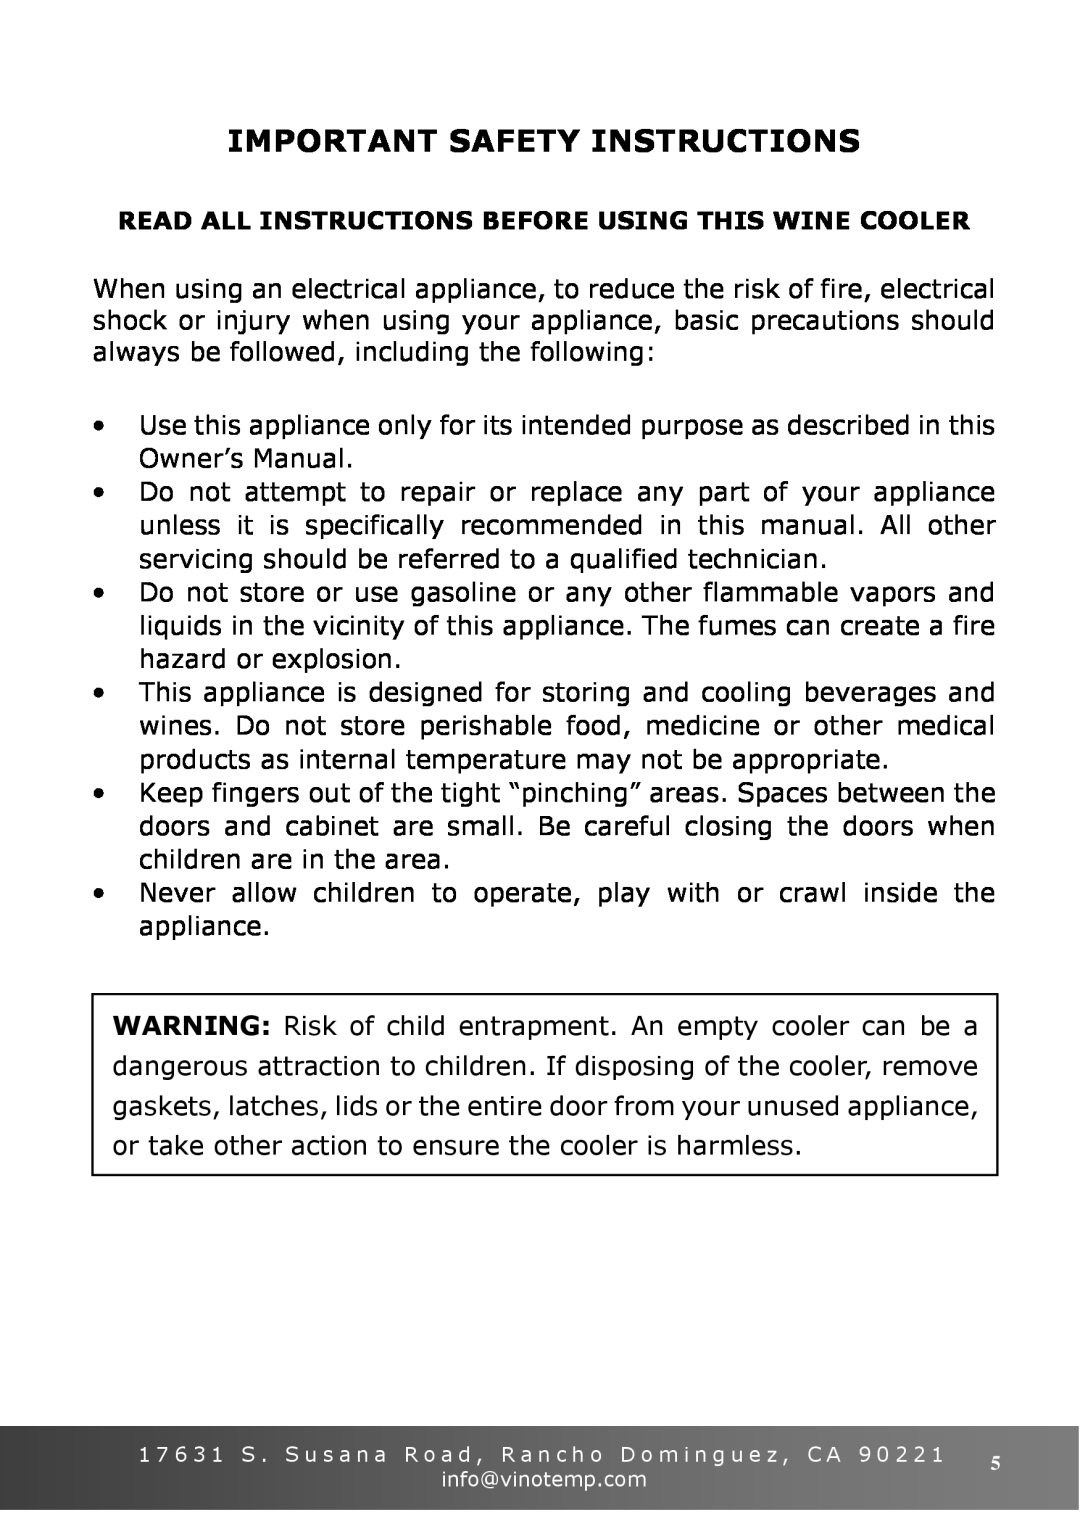 Vinotemp VT-36 owner manual Important Safety Instructions, Read All Instructions Before Using This Wine Cooler 